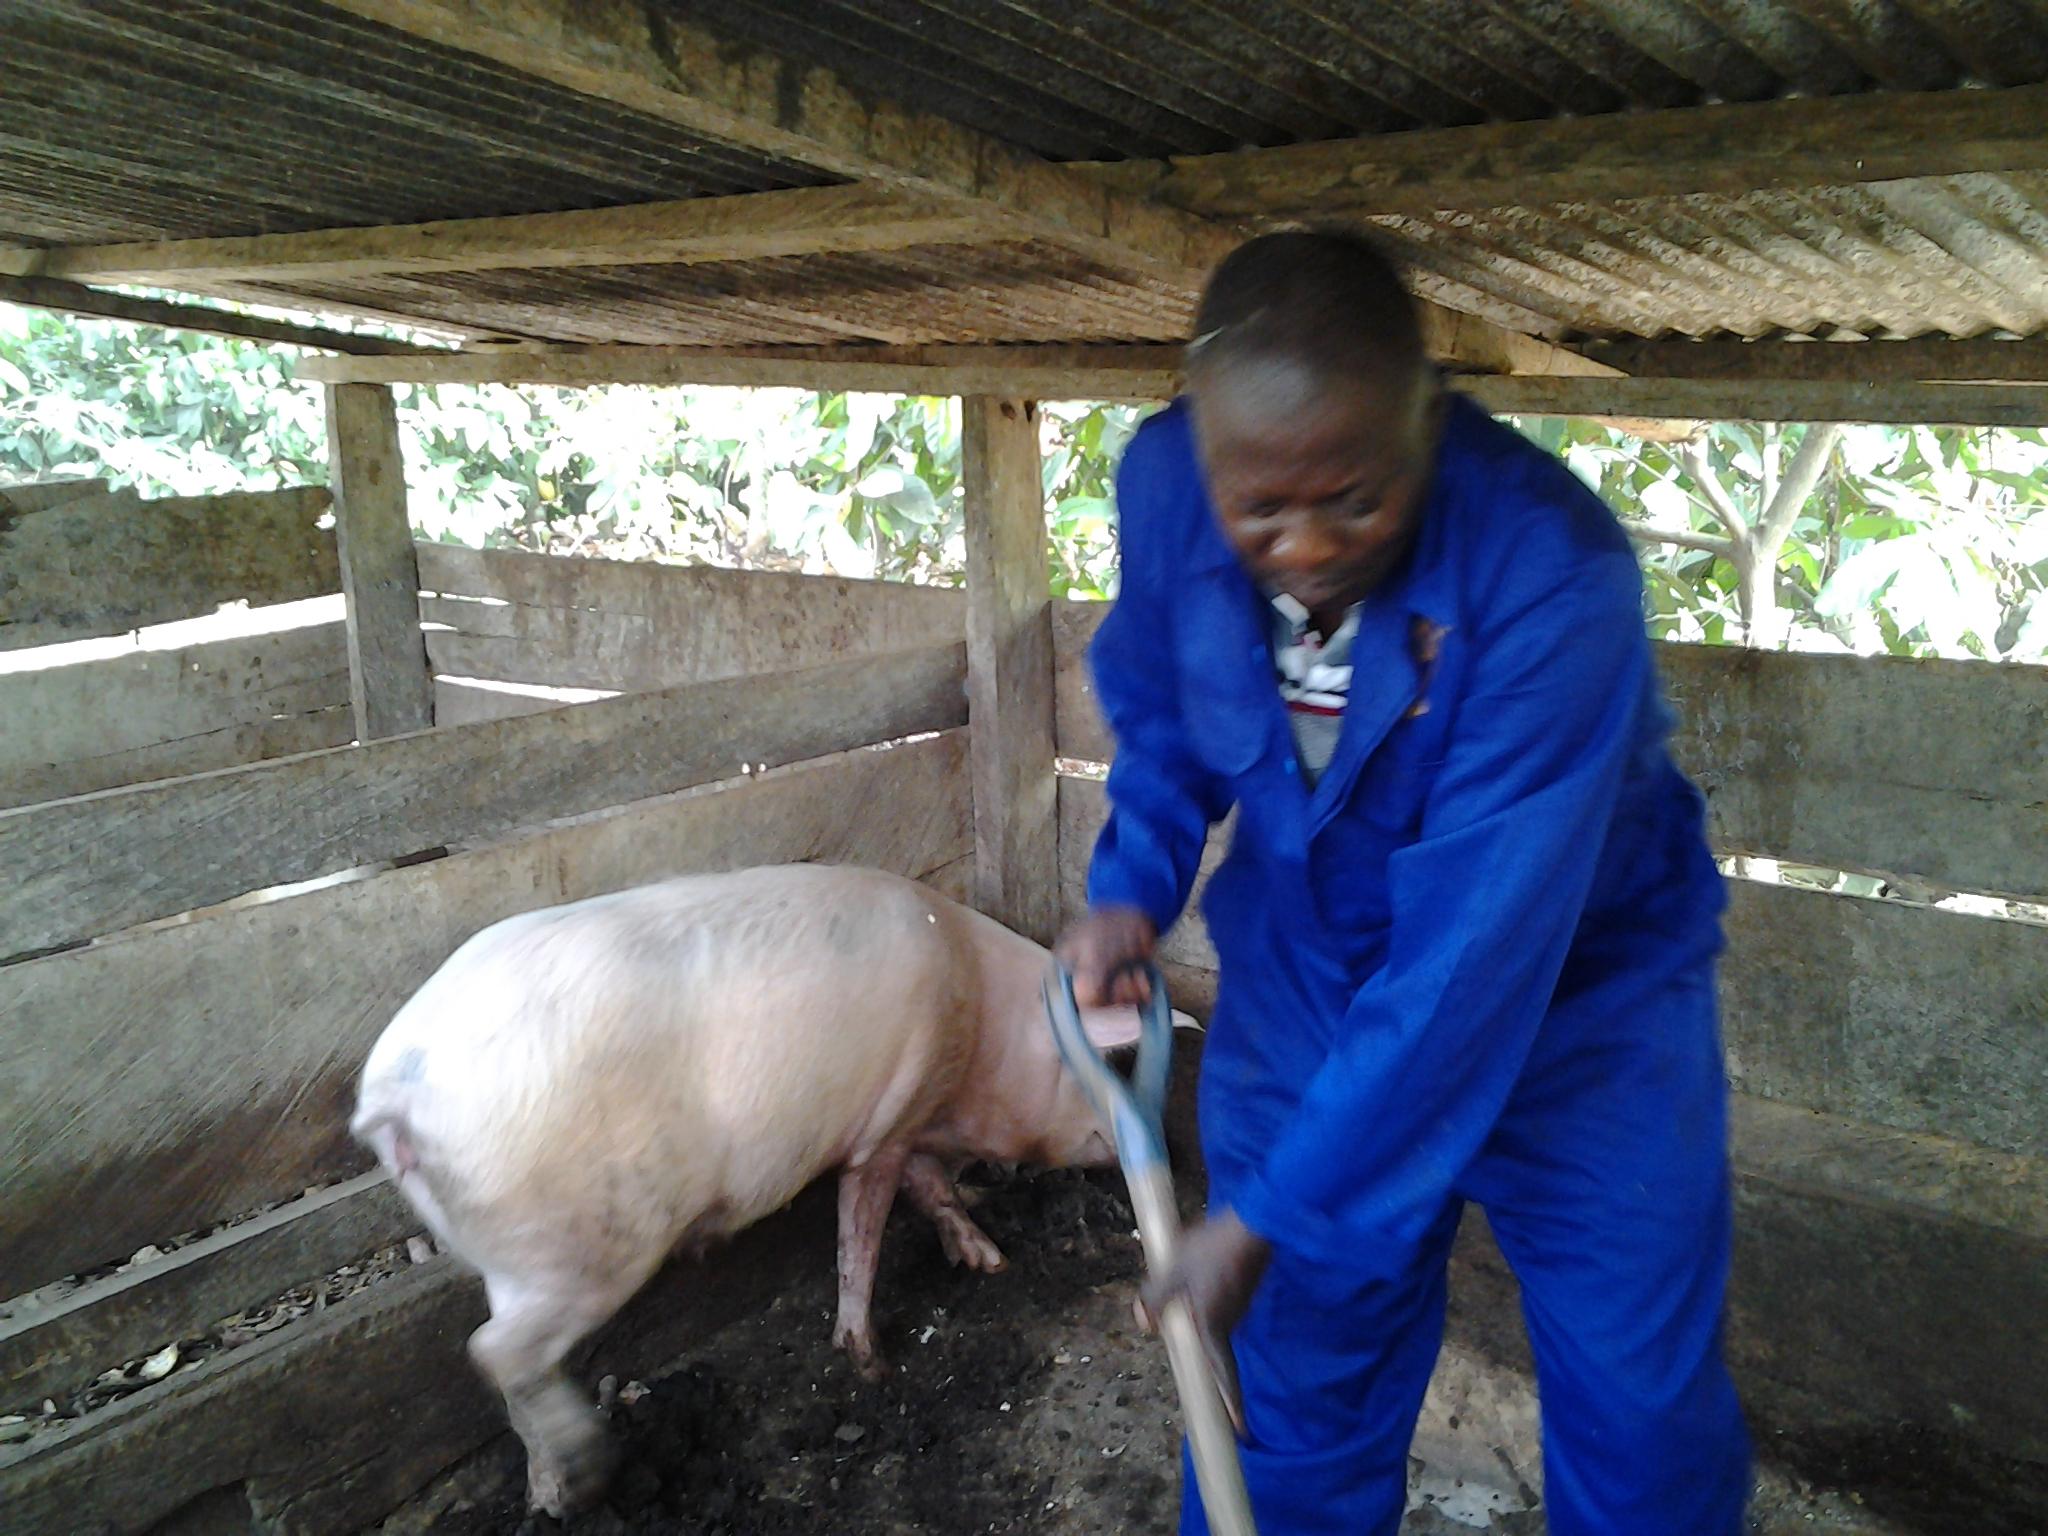 Piggery Farming: How To Build A Lucrative African Business From Scratch